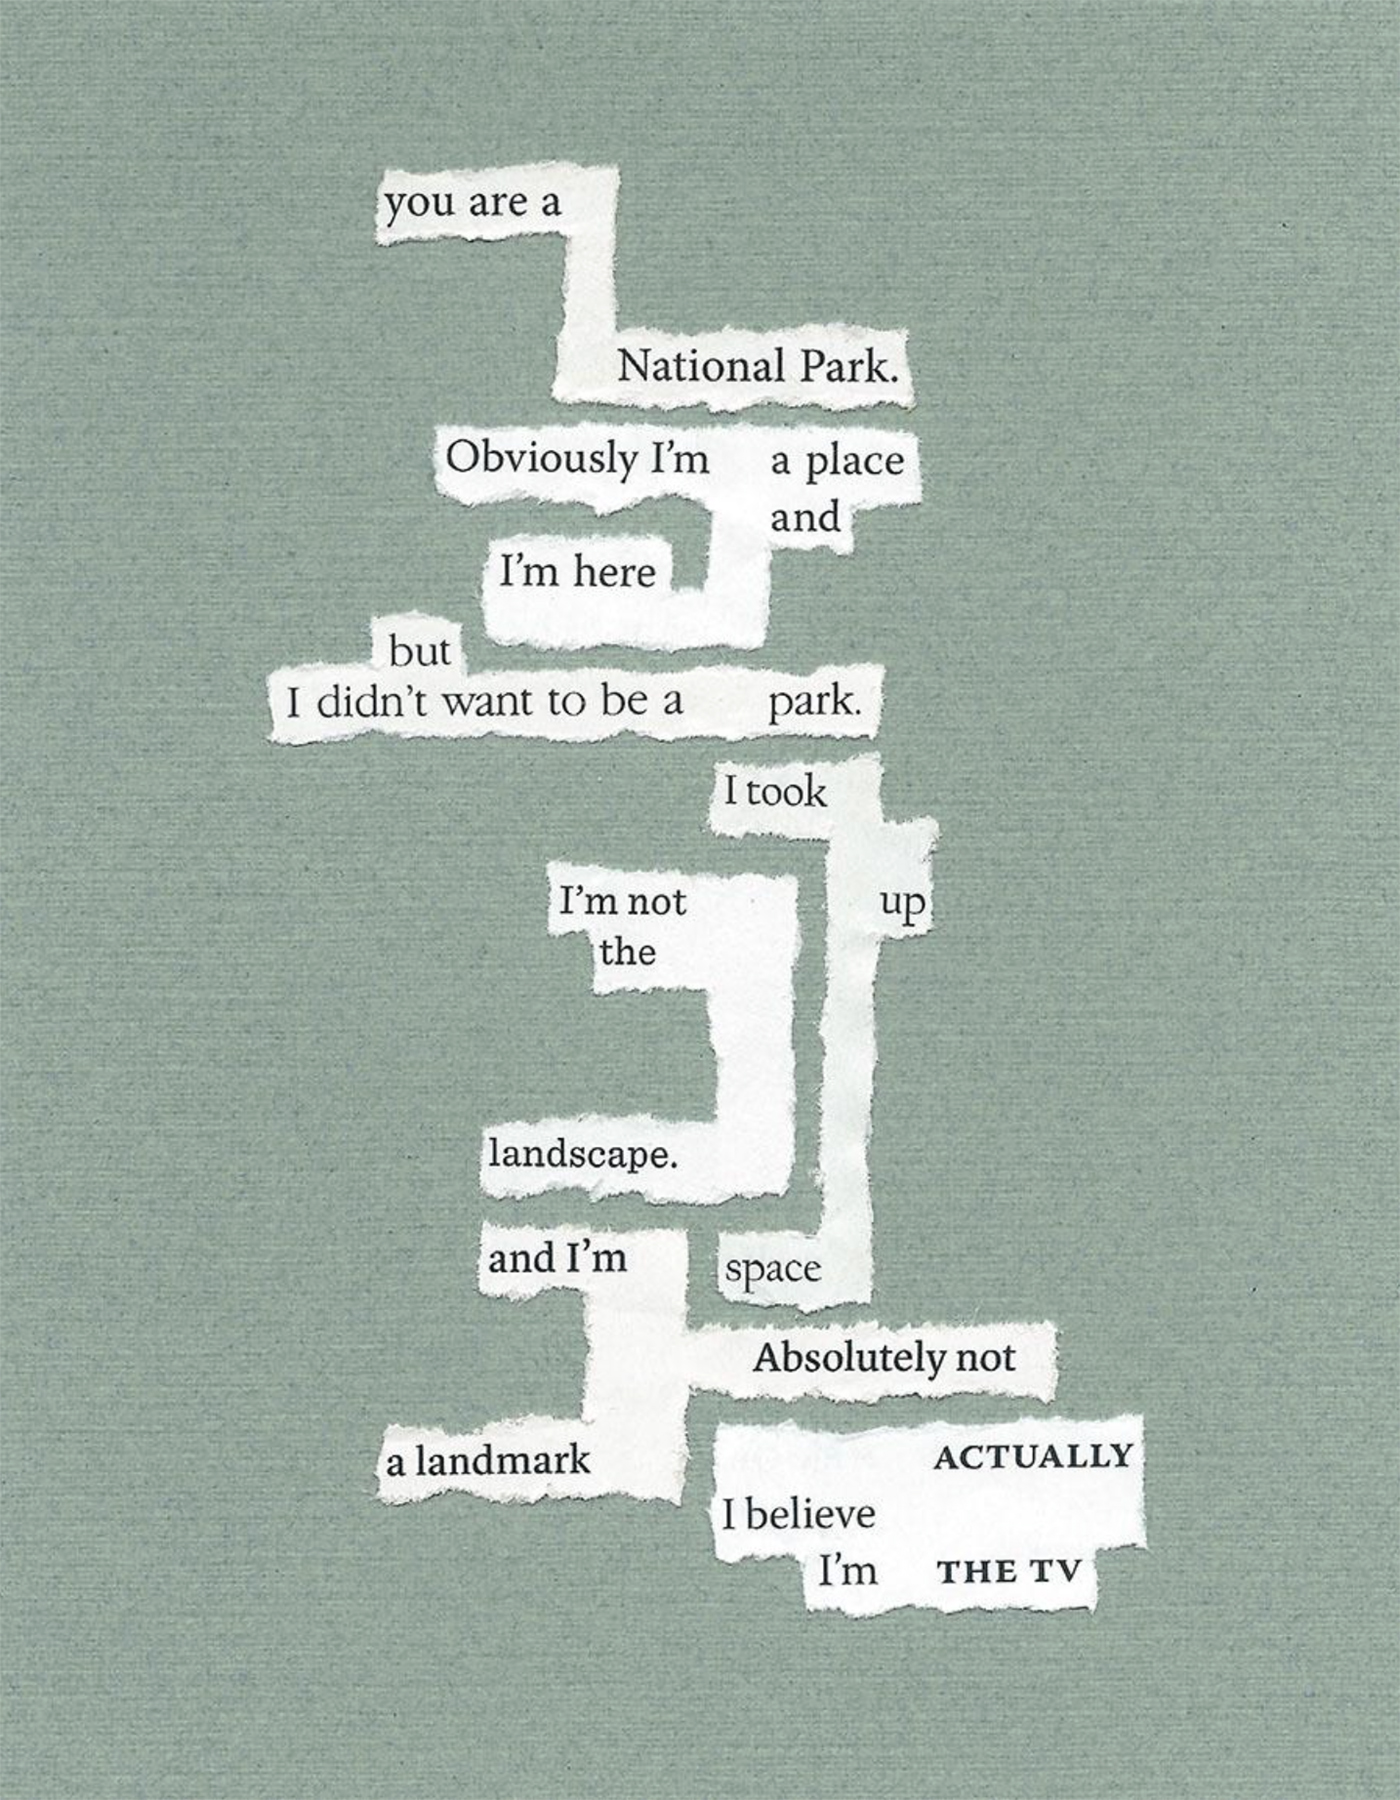 Cut-out collaged word image making up the poem You Are a National Park, courtesy of J I Kleinberg